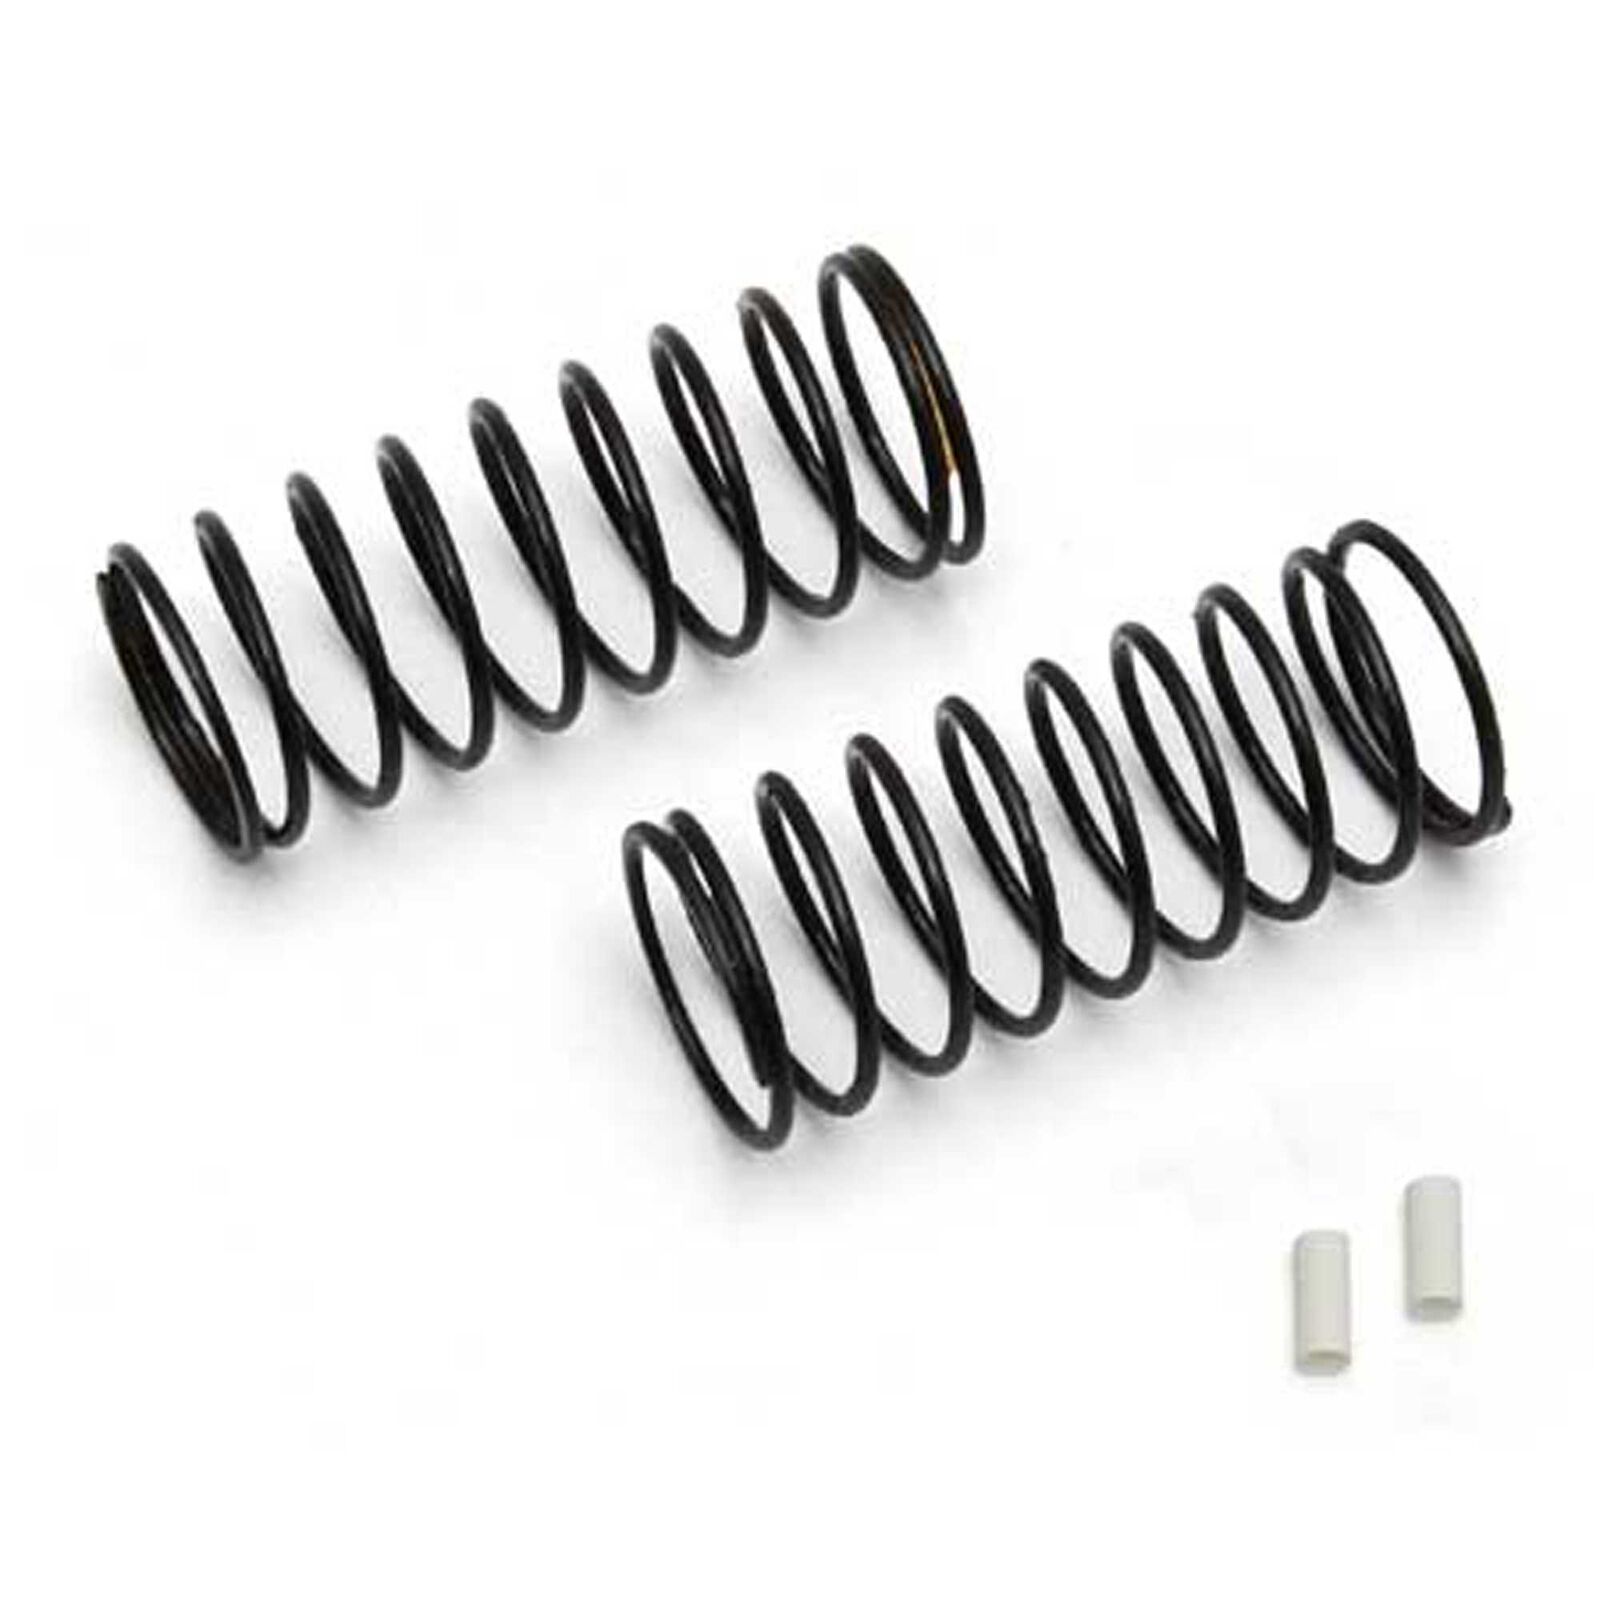 Factory Team 12mm Front Springs White 3.30 lb